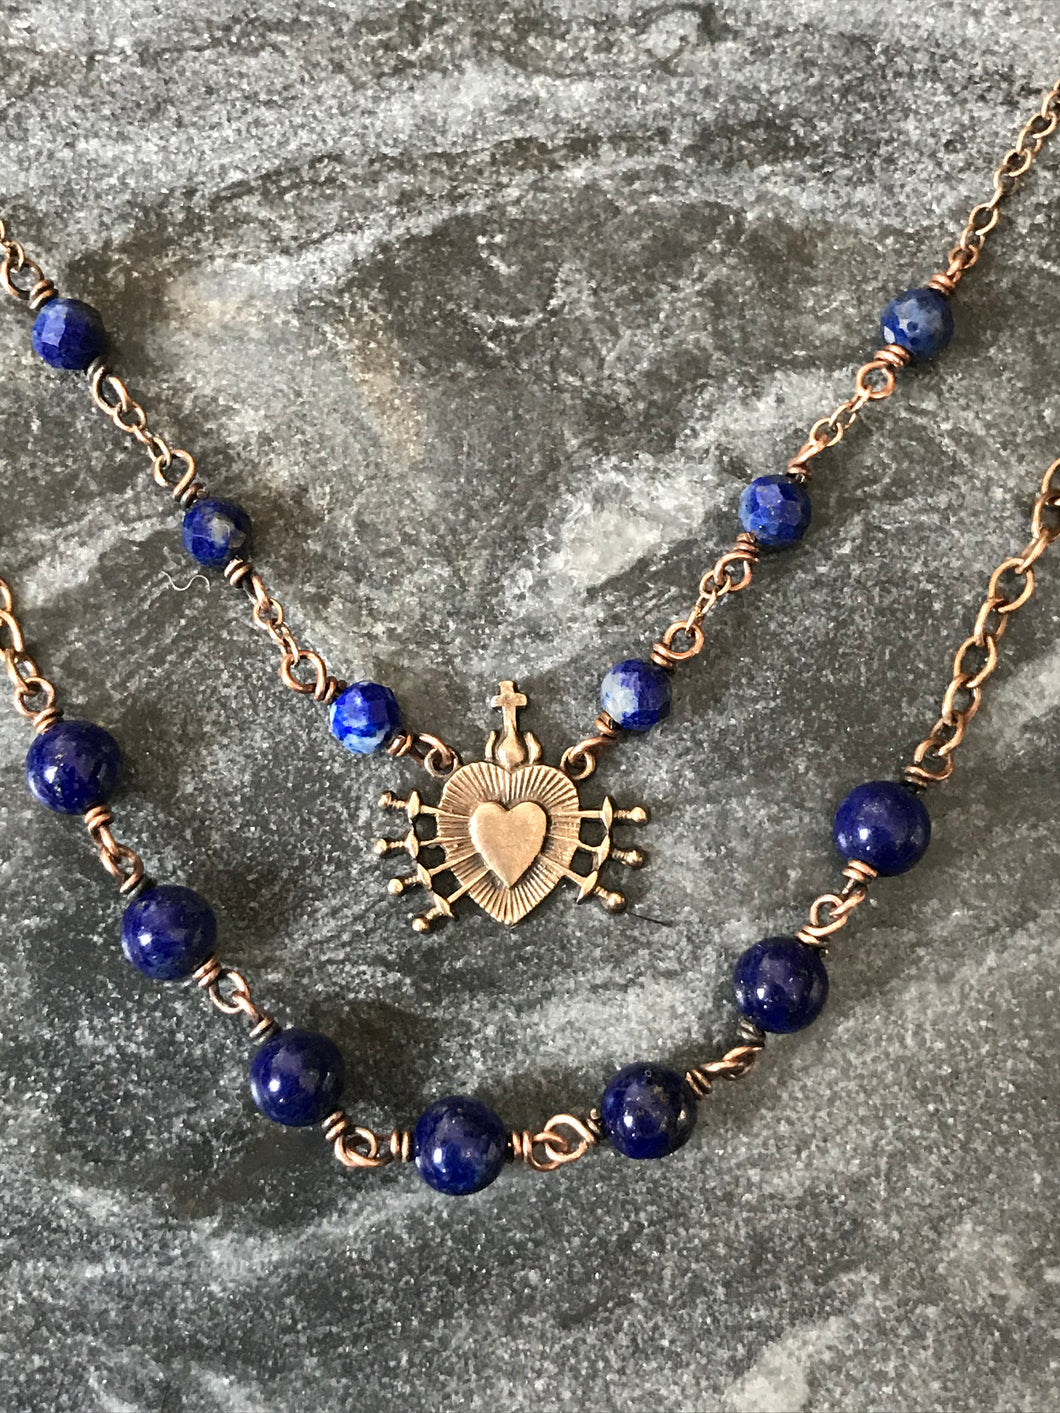 Seven Sorrows Necklace- OL of Sorrows, Lapis Gemstones and Bronze